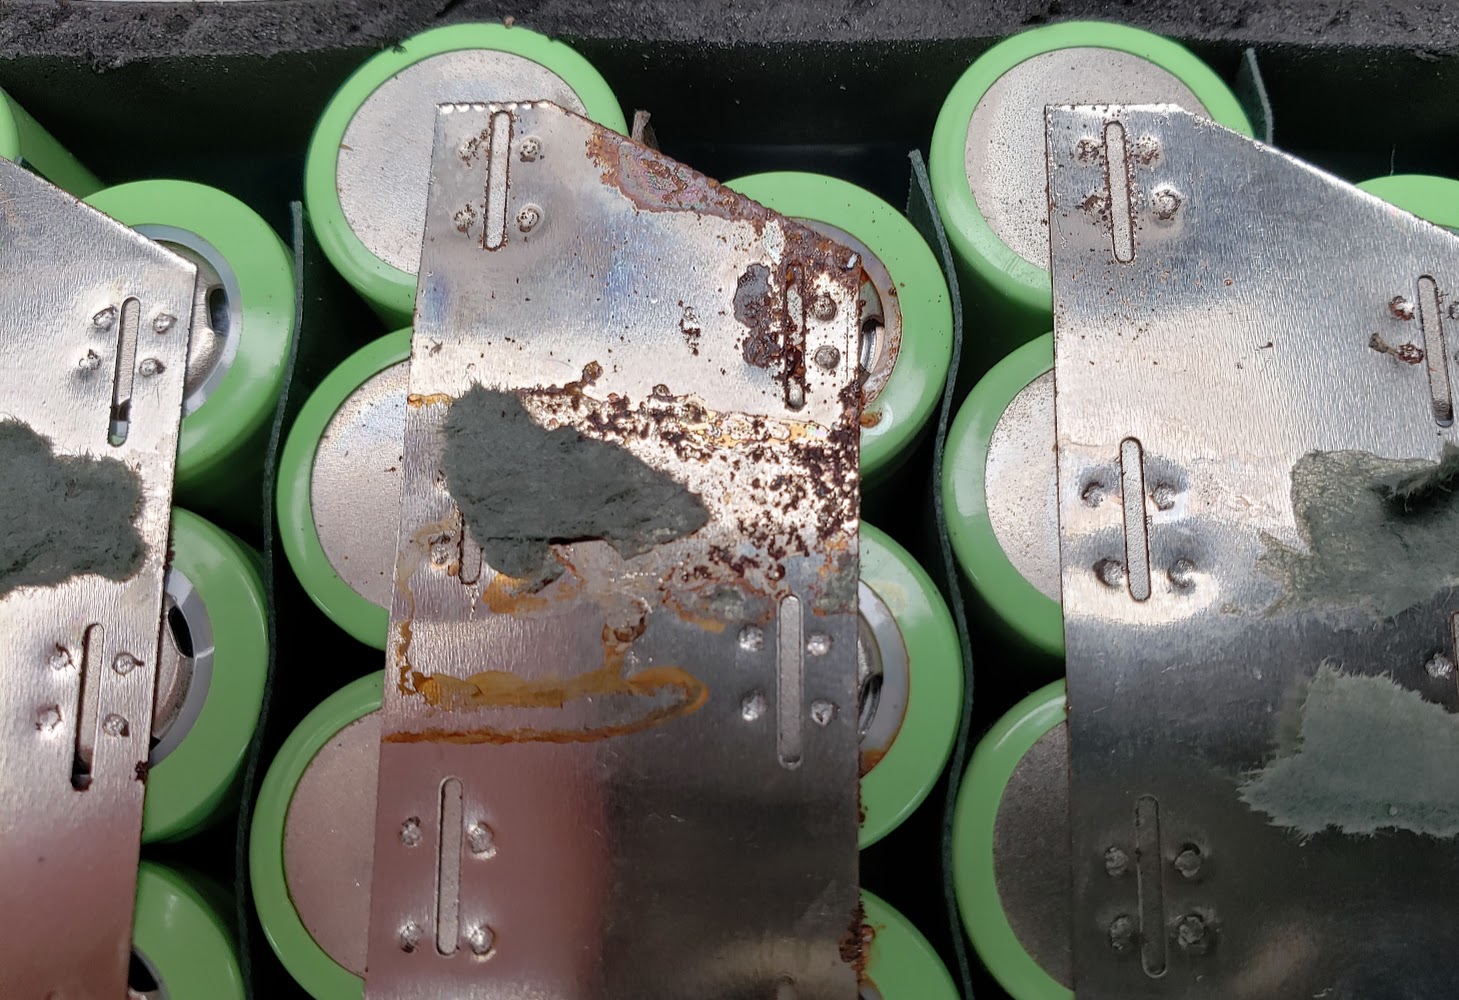 batteries_parker_14s_opened_showing_bottom_of_14s6p_pack_strip_corrosion_closeup_photo